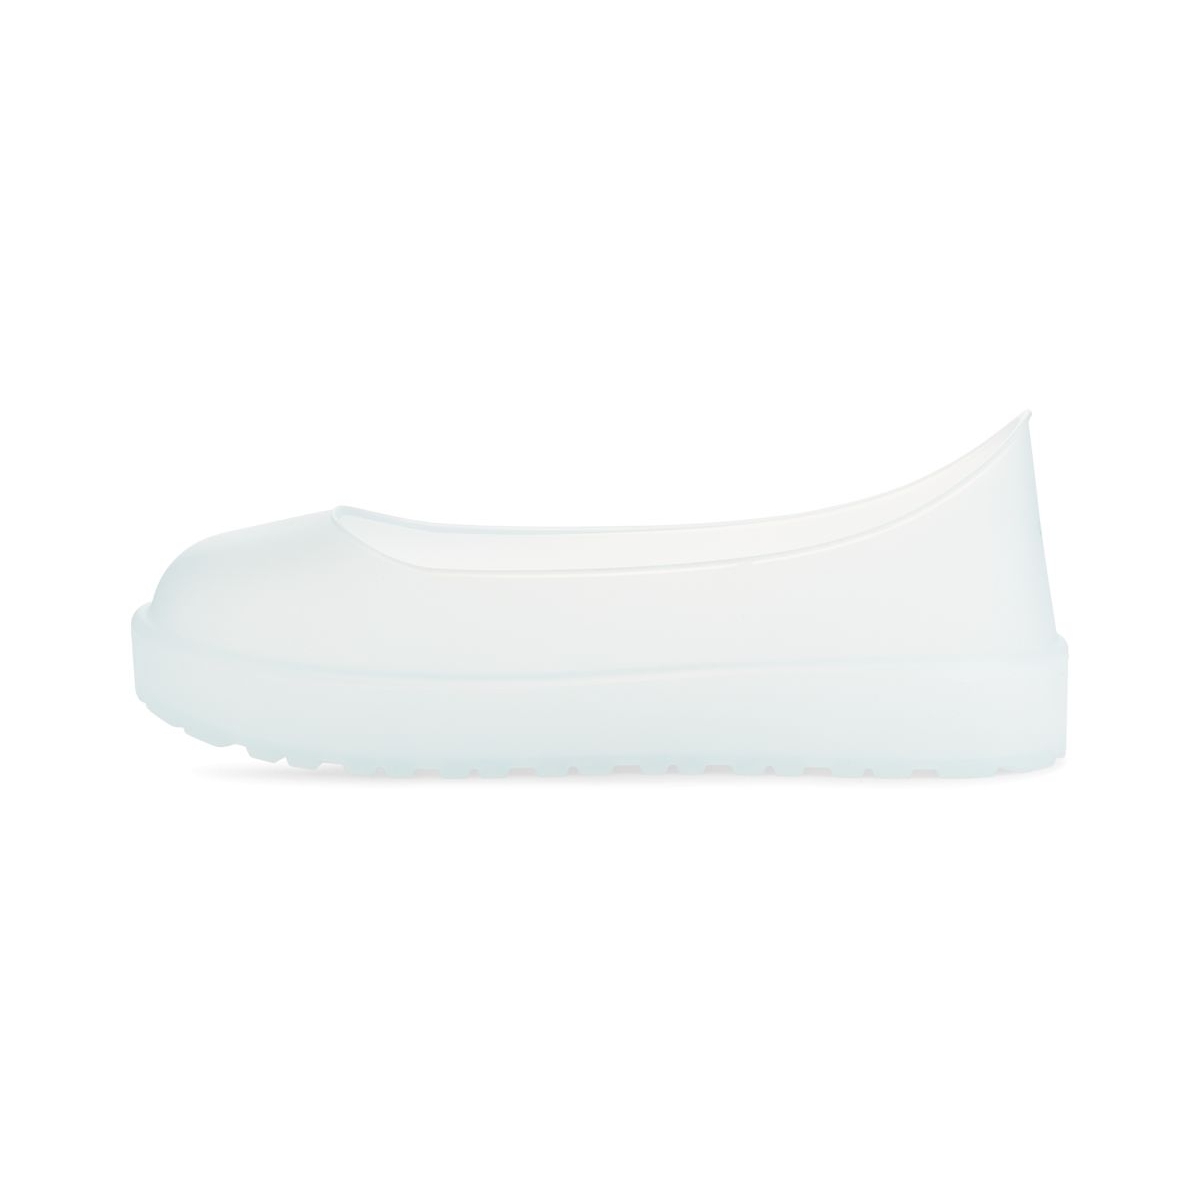 UGG Unisex Boot Guard Silicone Rubber Galosh Clear - 1129431-CLR CLEAR - CLEAR, S